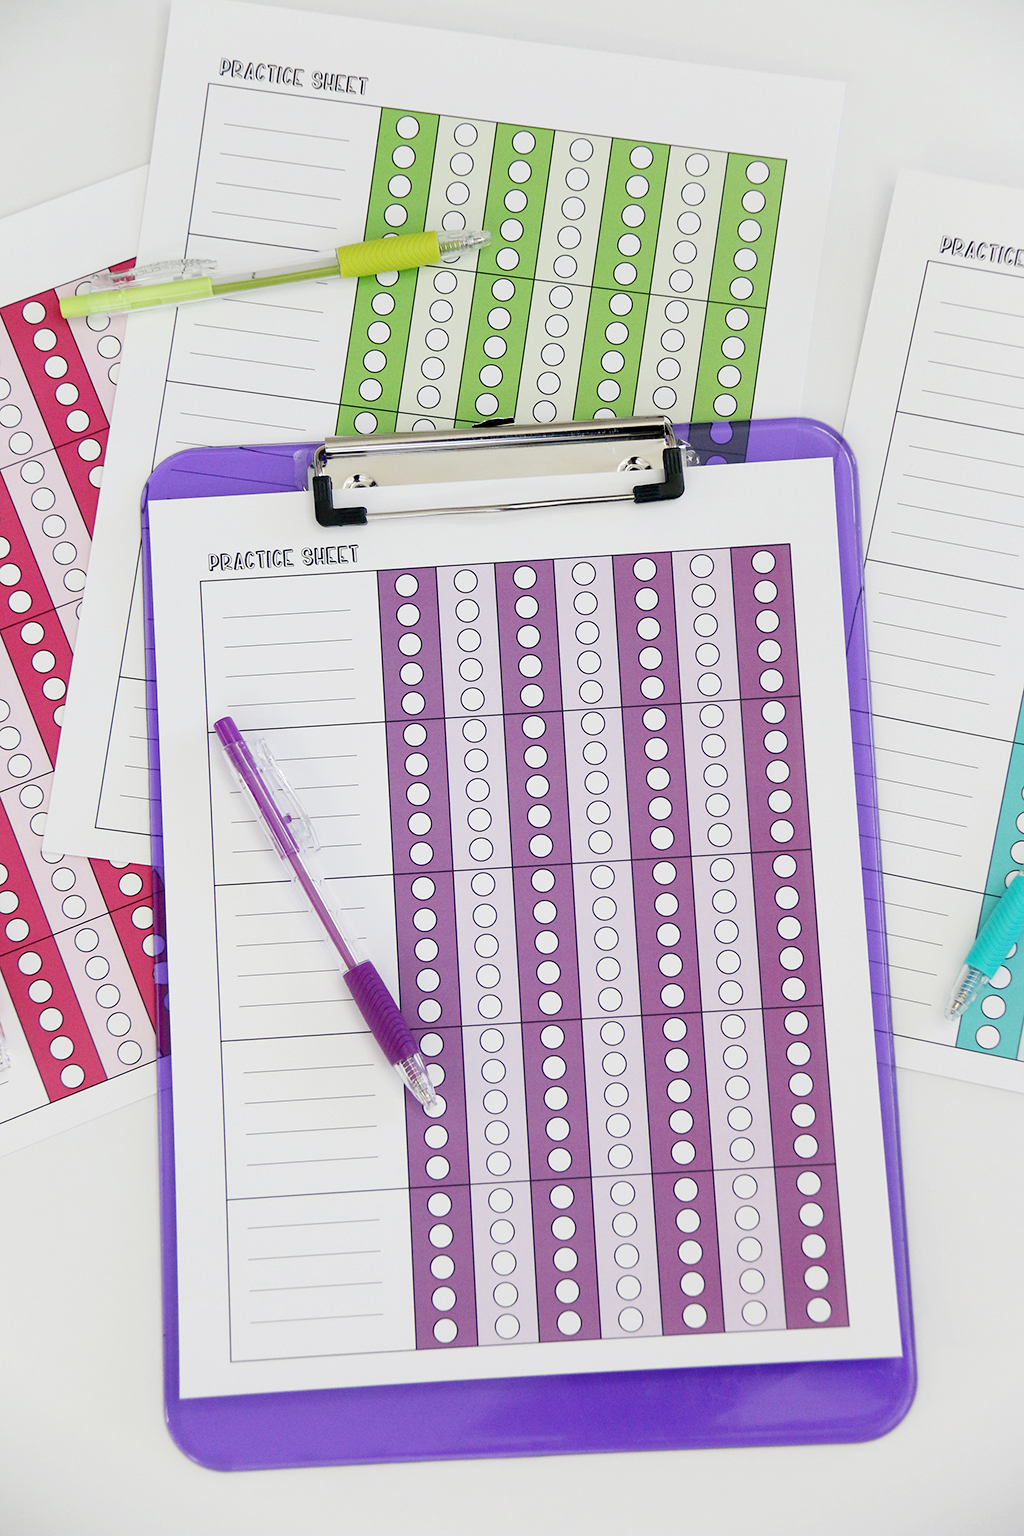 Anyone here love nagging their kids to practice? We've created these Free Printable Practice Charts for Kids so they can keep track and you can relax a little.